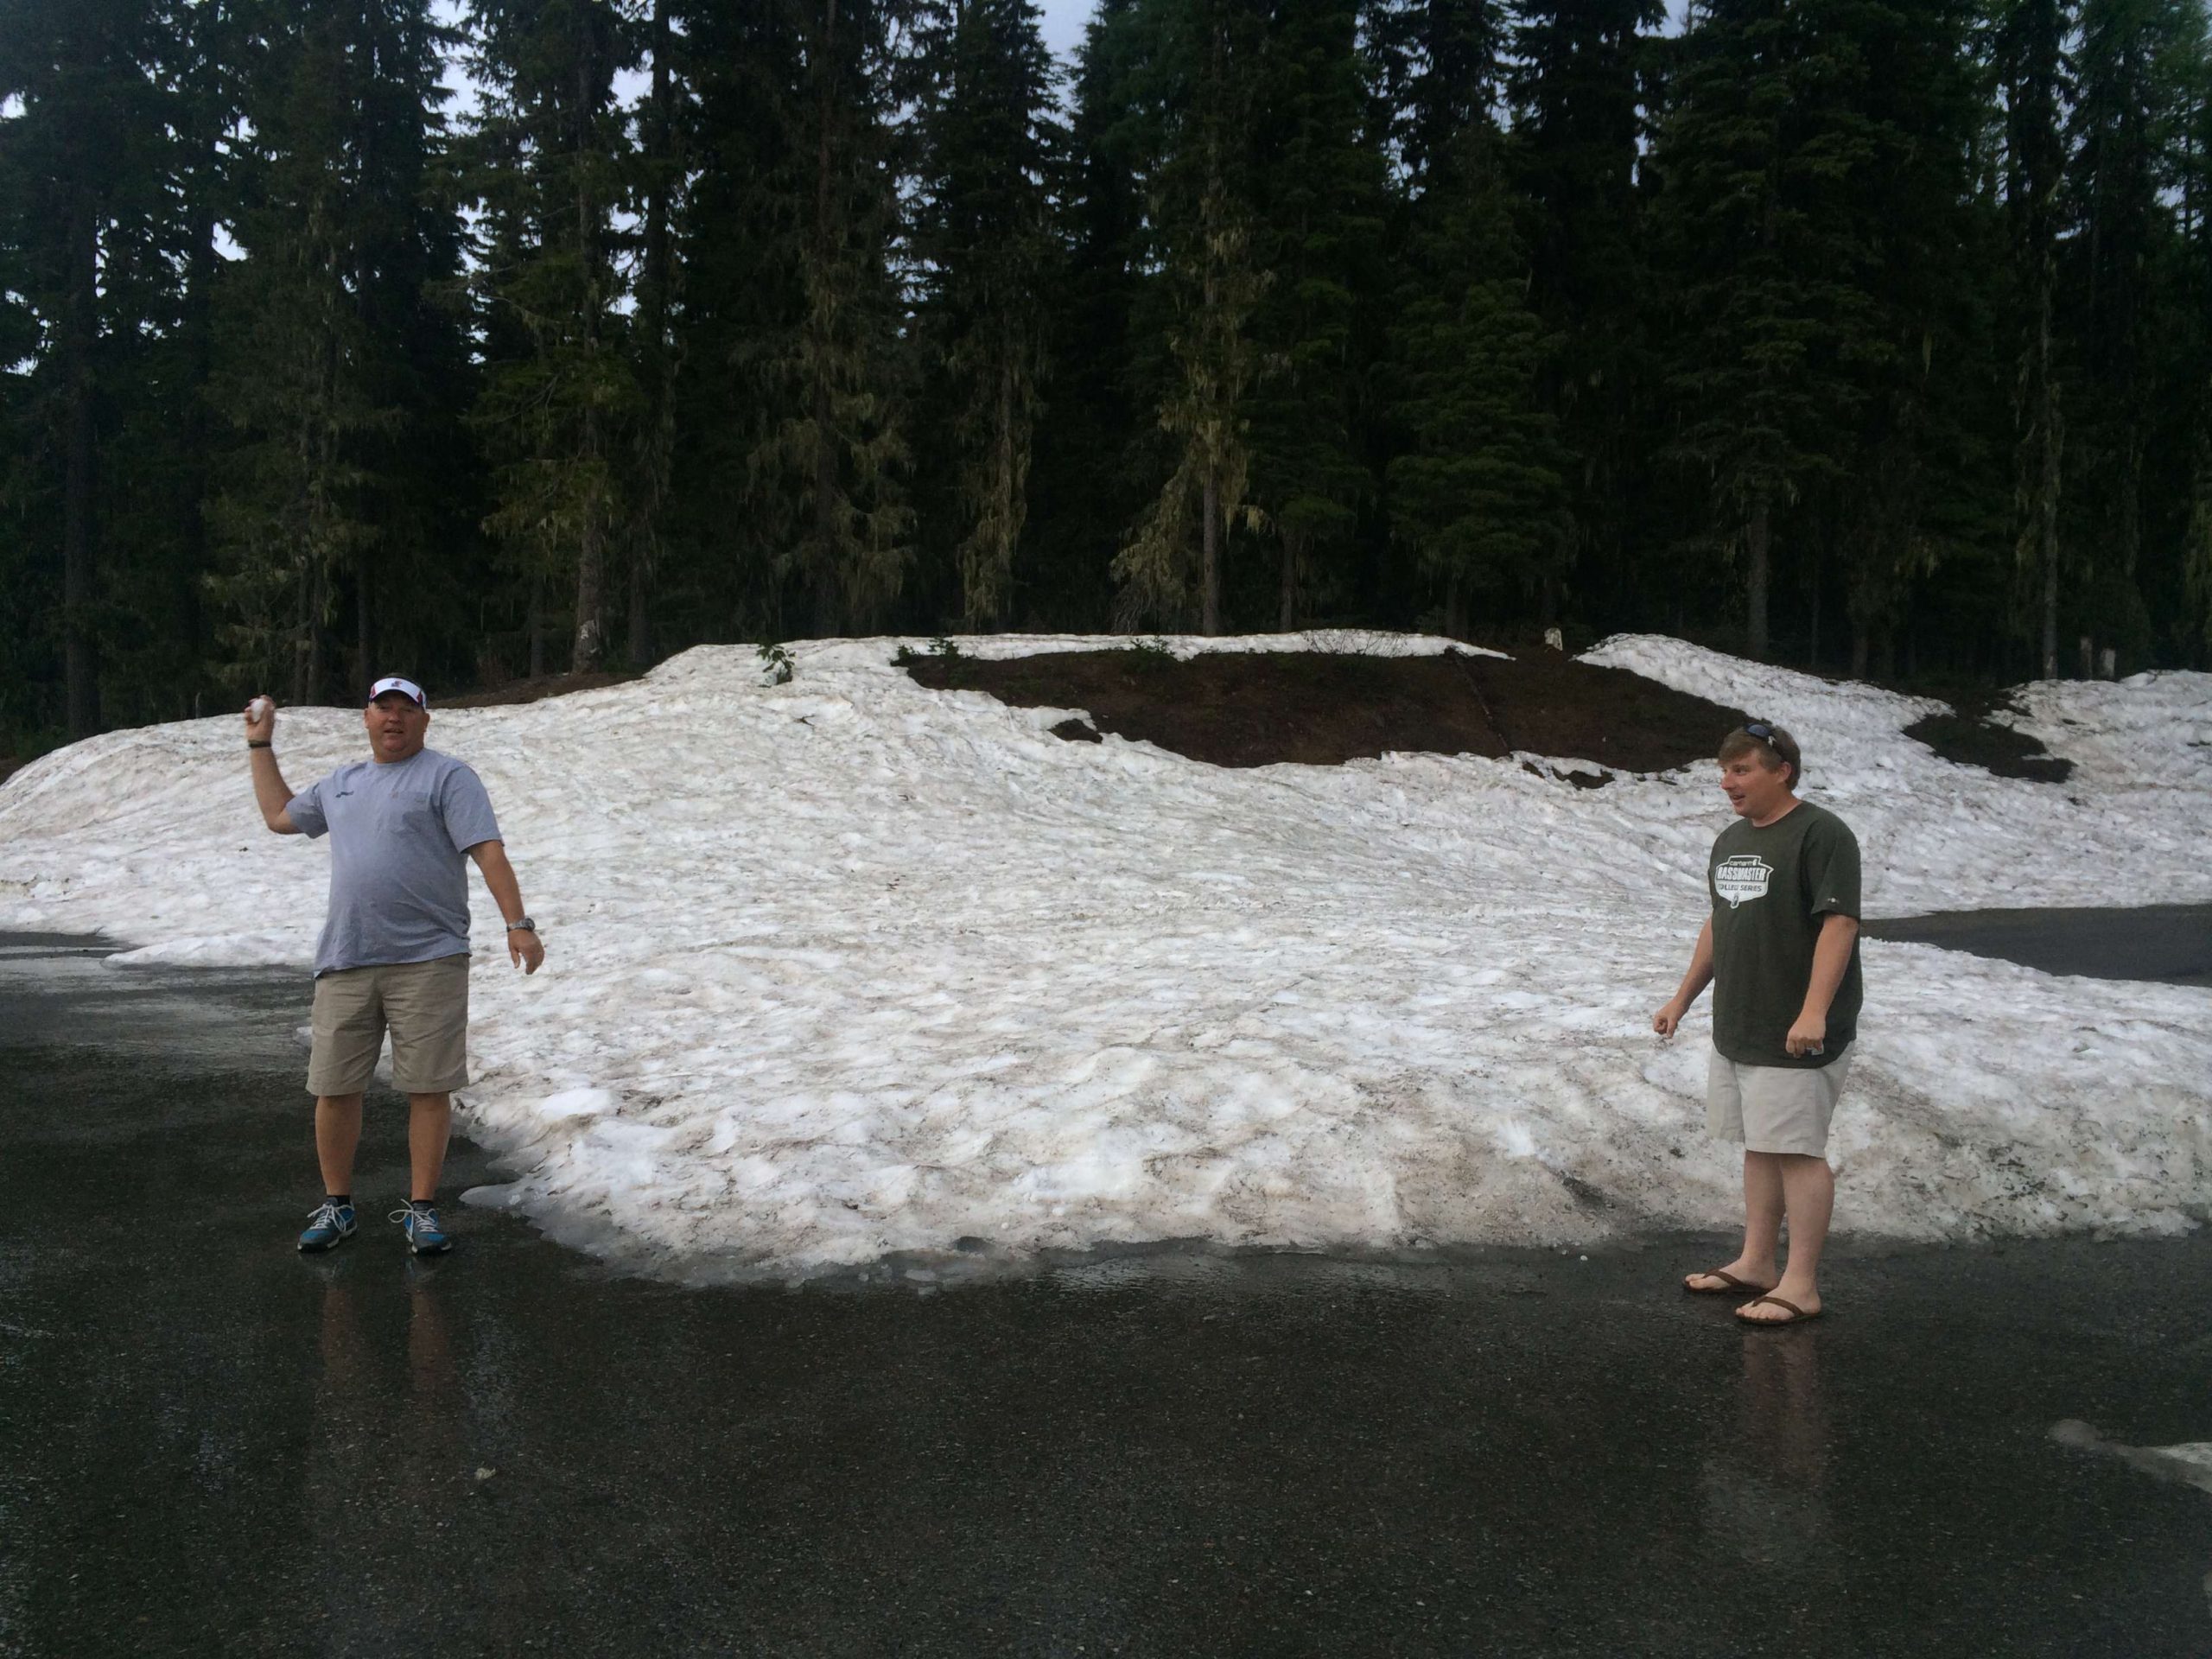 Leave it to the men to start a snowball fight.